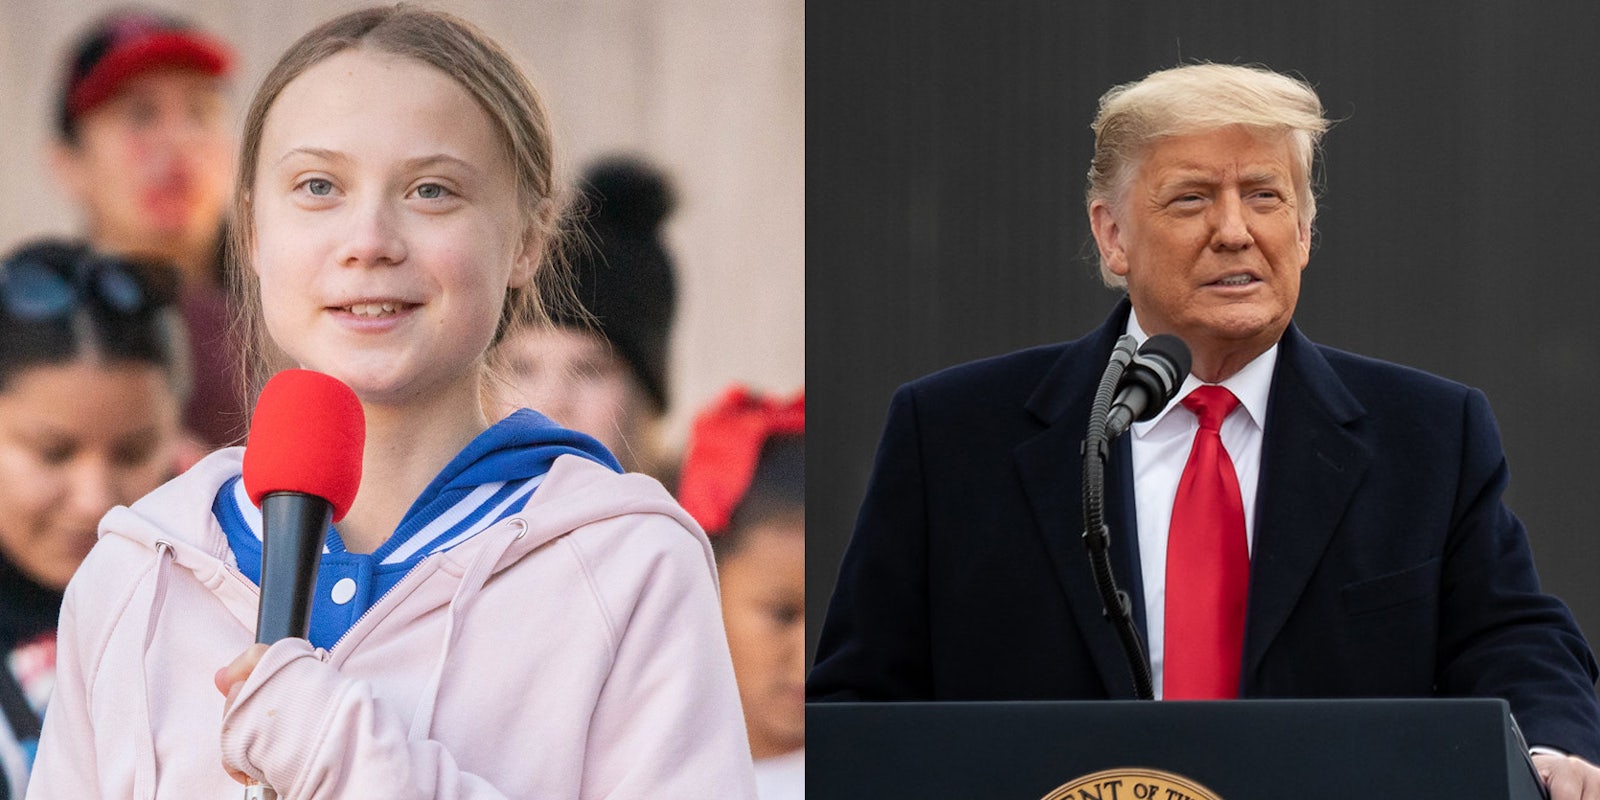 A side by side of Greta Thunberg and Donald Trump